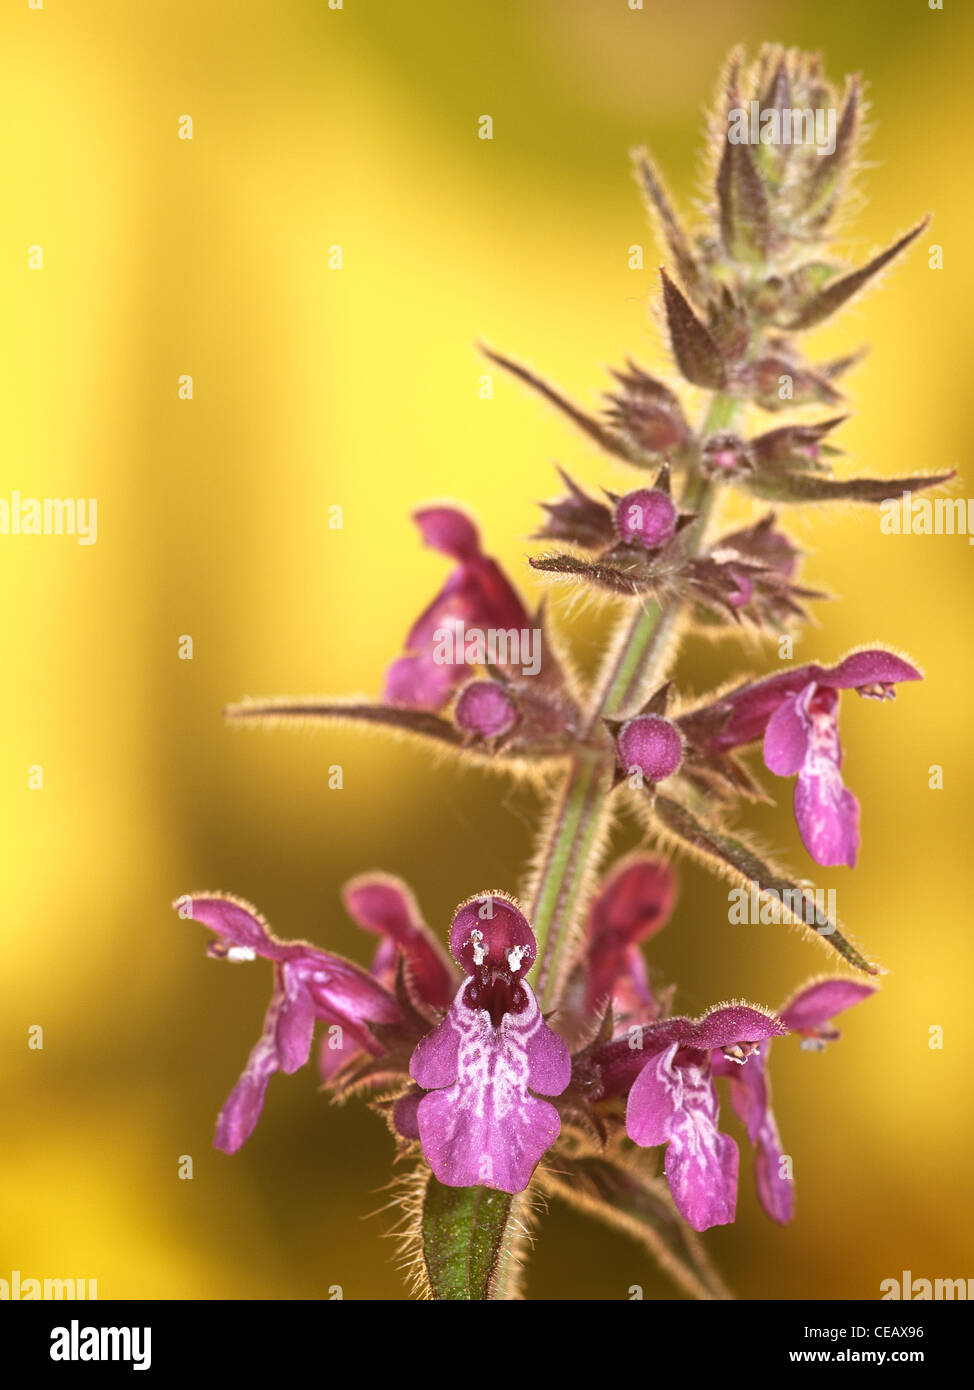 Hedge woundwor, Stachys sylvatica, portrait of purple flowers with nice out focus  yellow background. Stock Photo